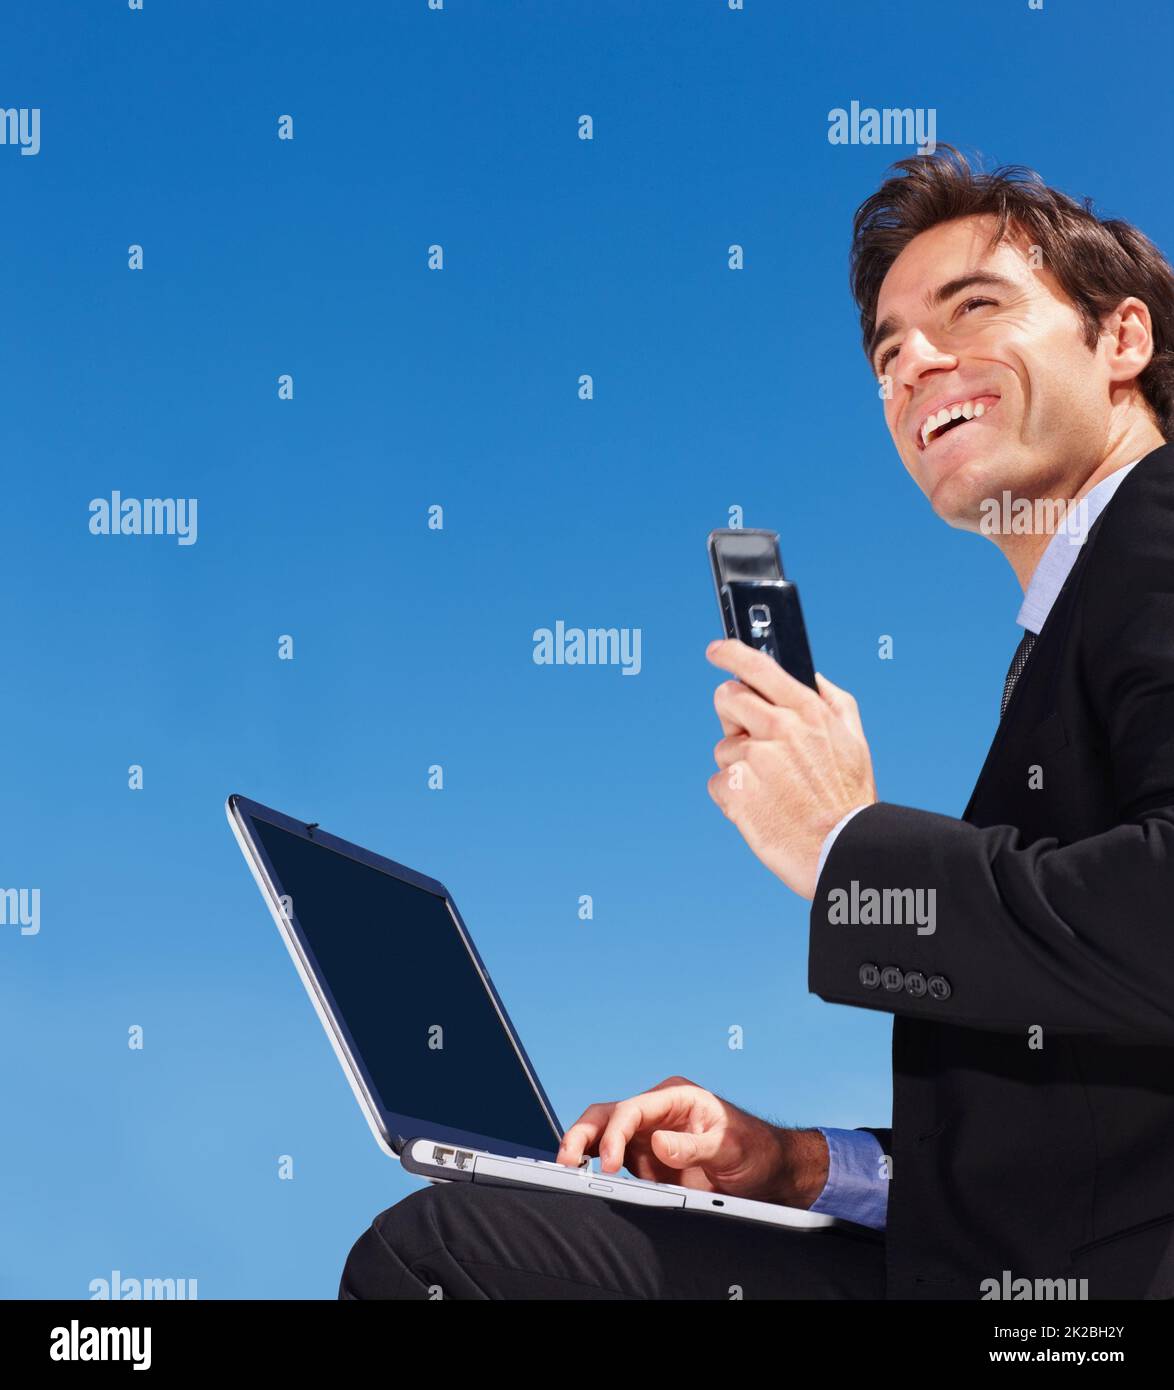 business man using a laptop while holding a mobile phone. Successful young business man using a laptop while holding a mobile phone. Stock Photo